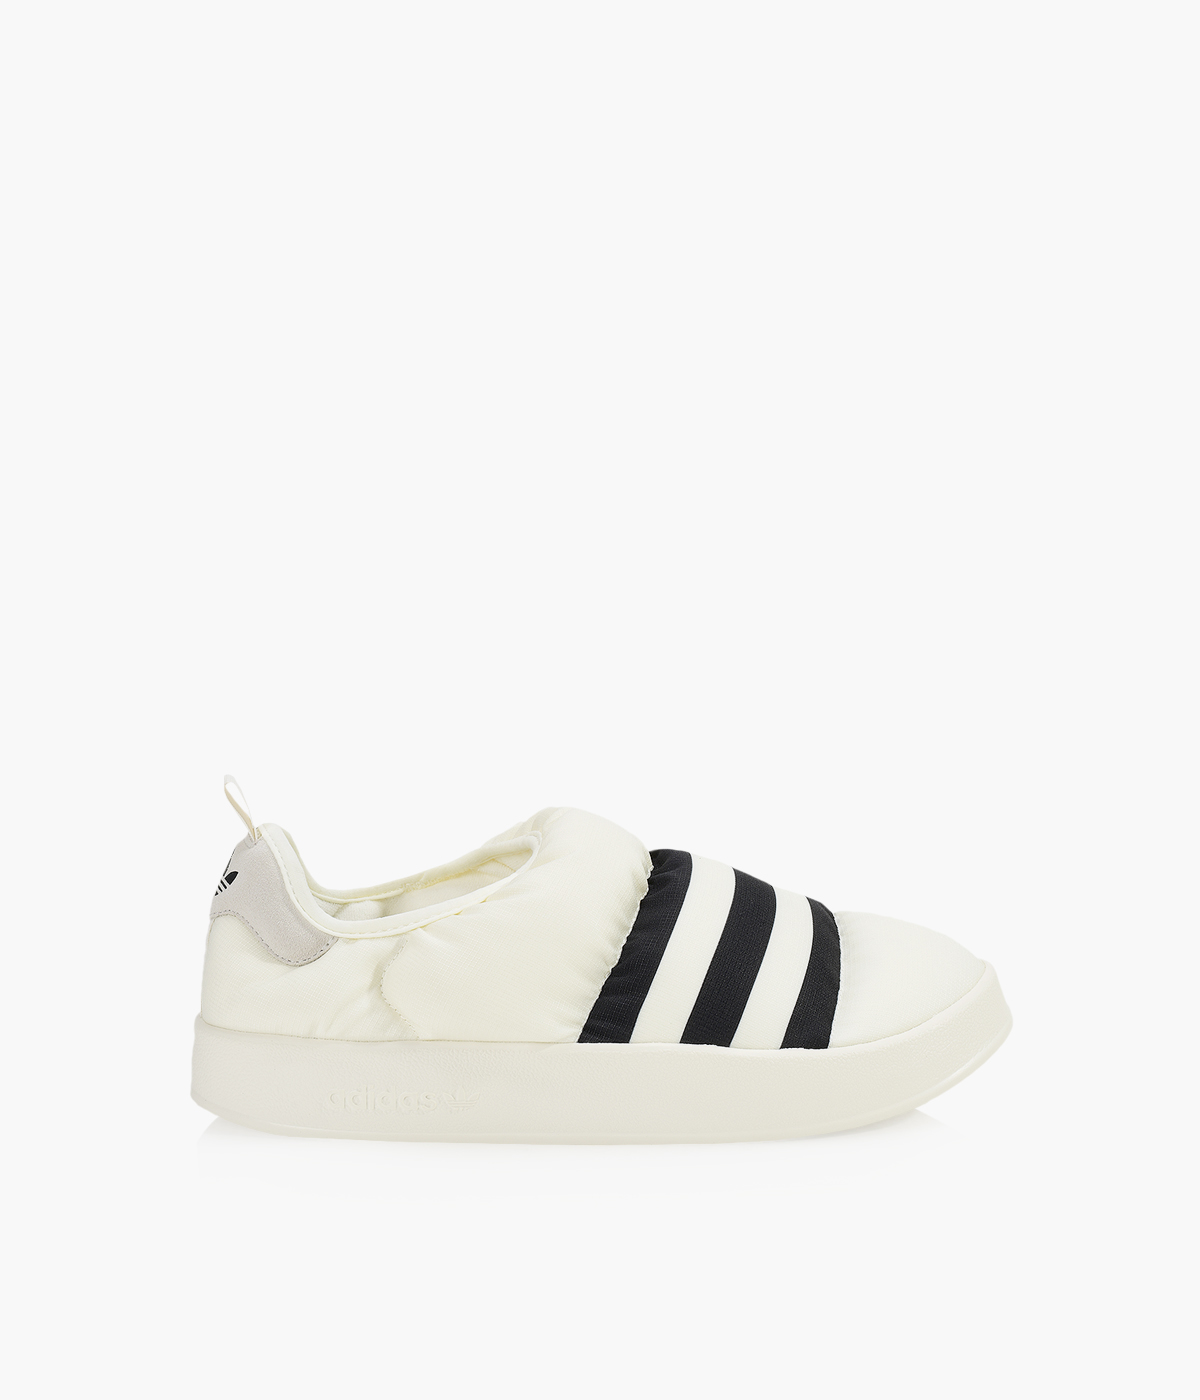 ADIDAS PUFFYLETTE - Nylon | Browns Shoes